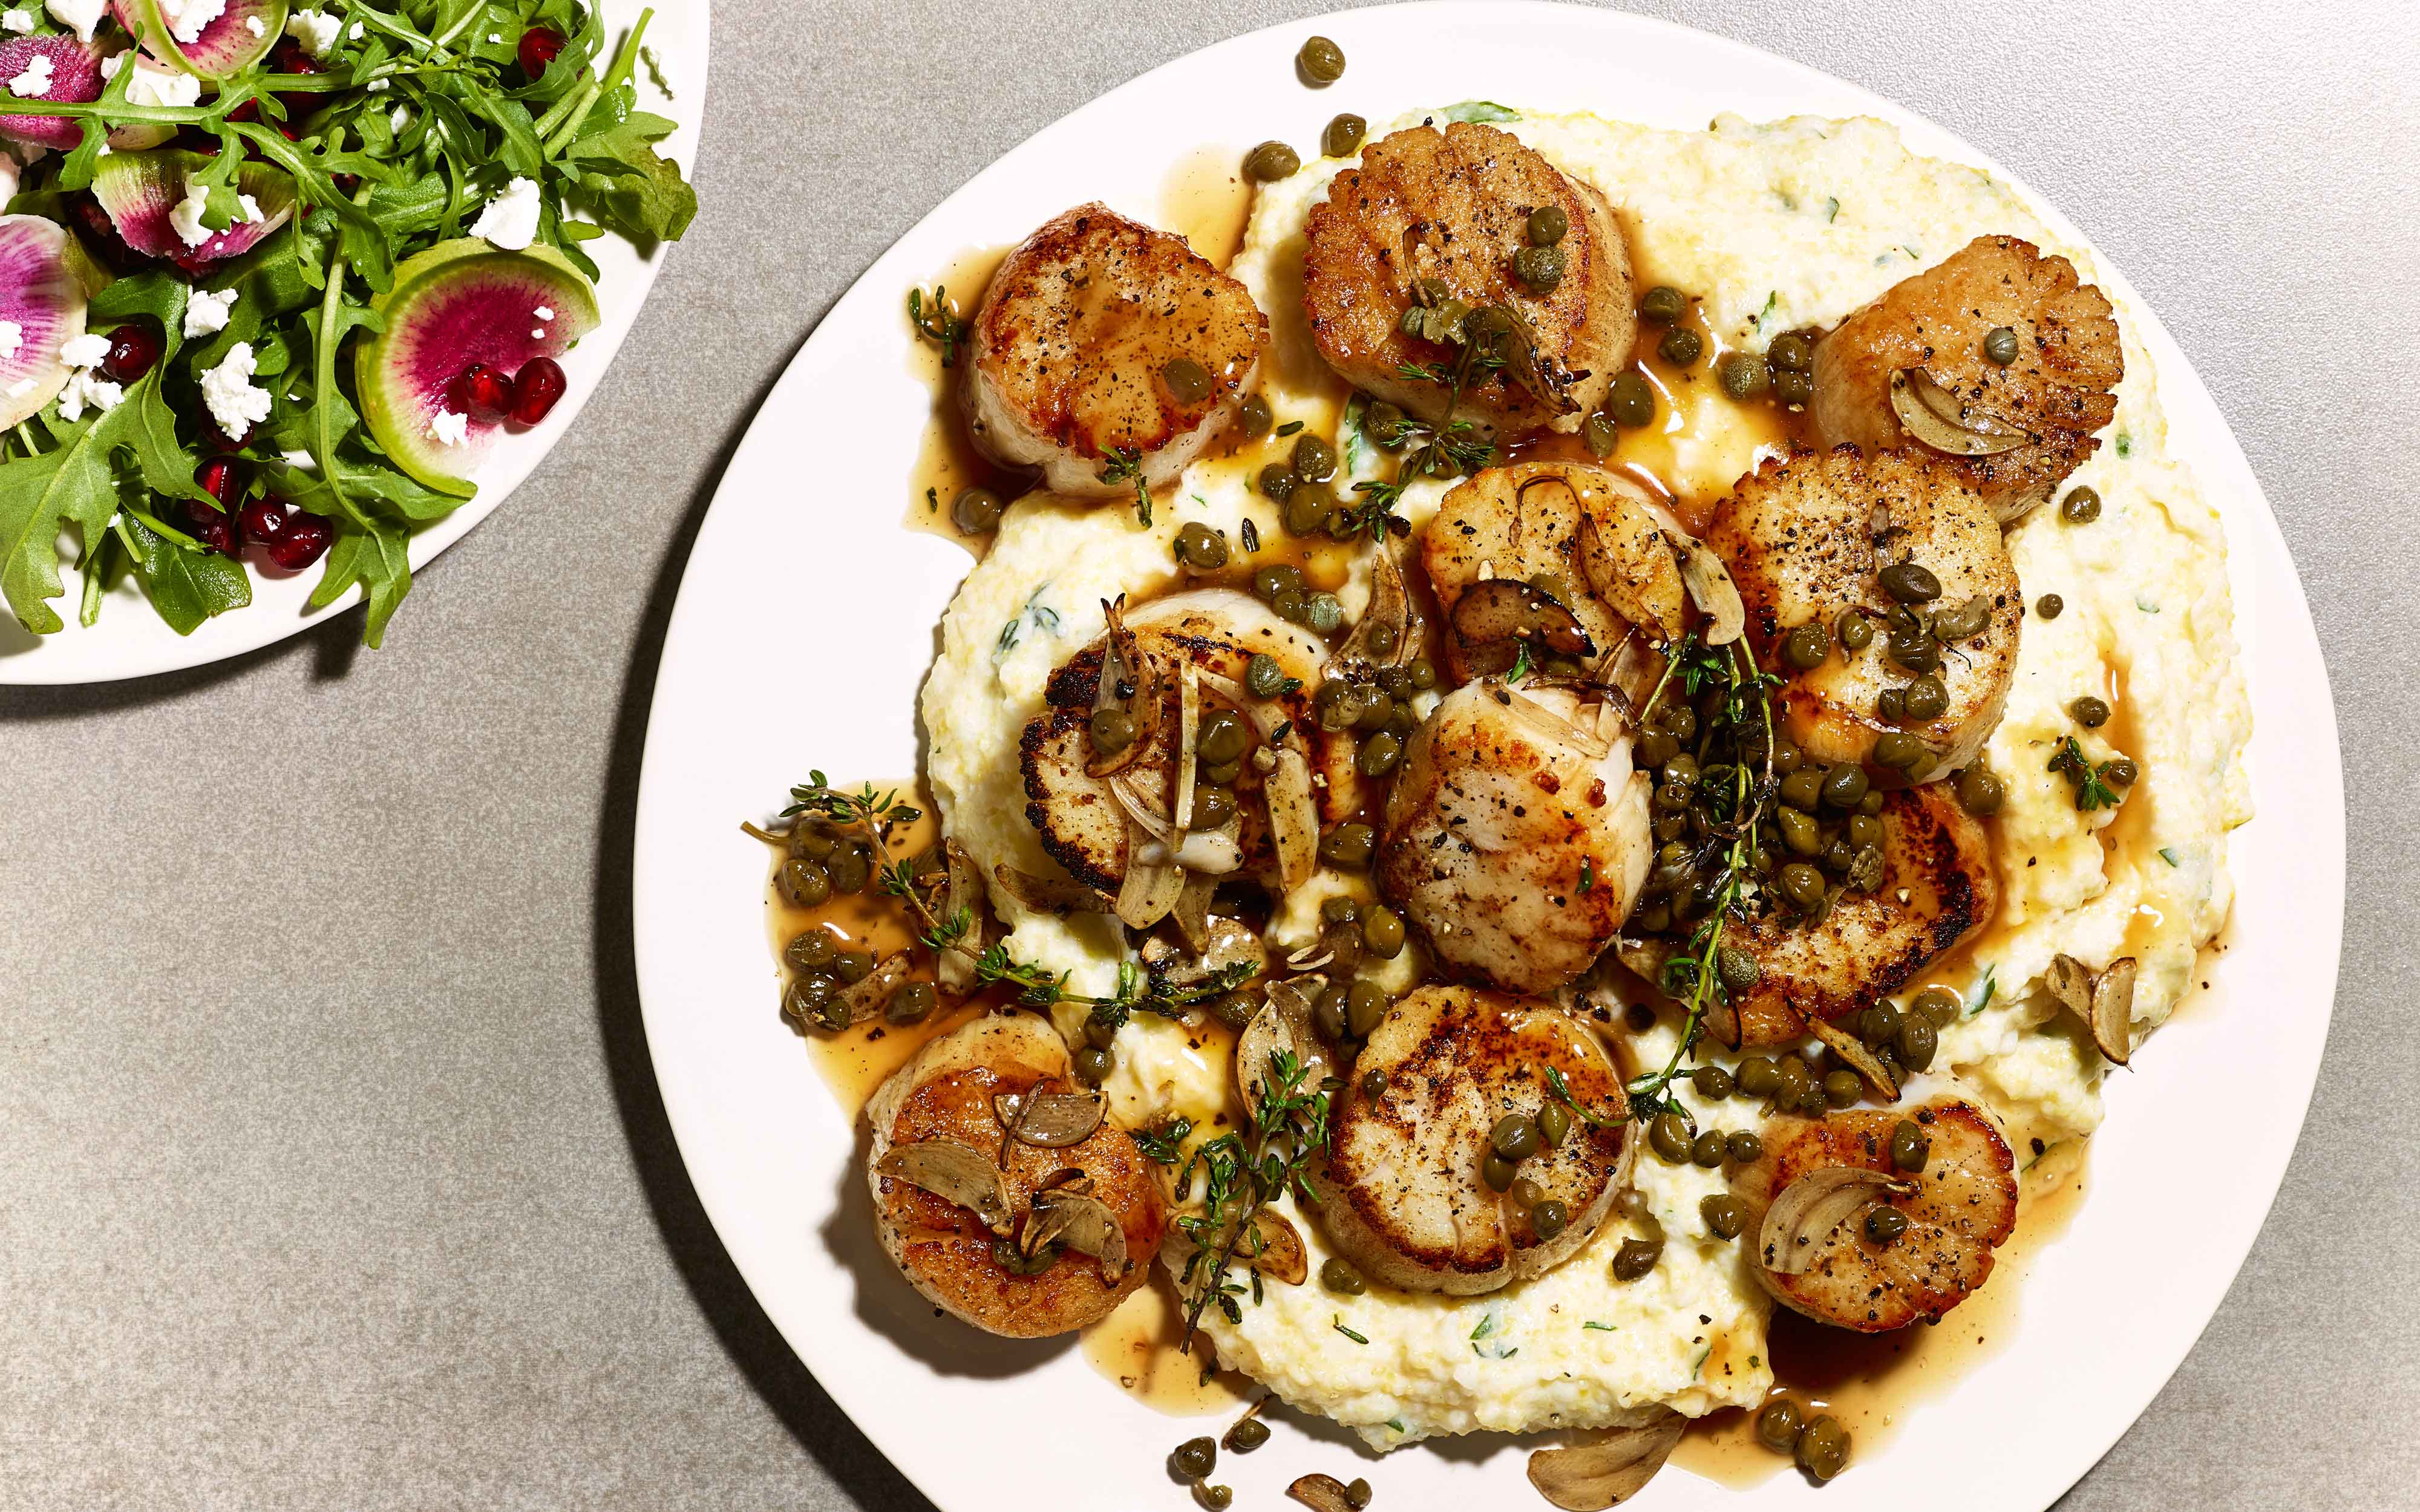 scallops-and-gritts-with-side-salad